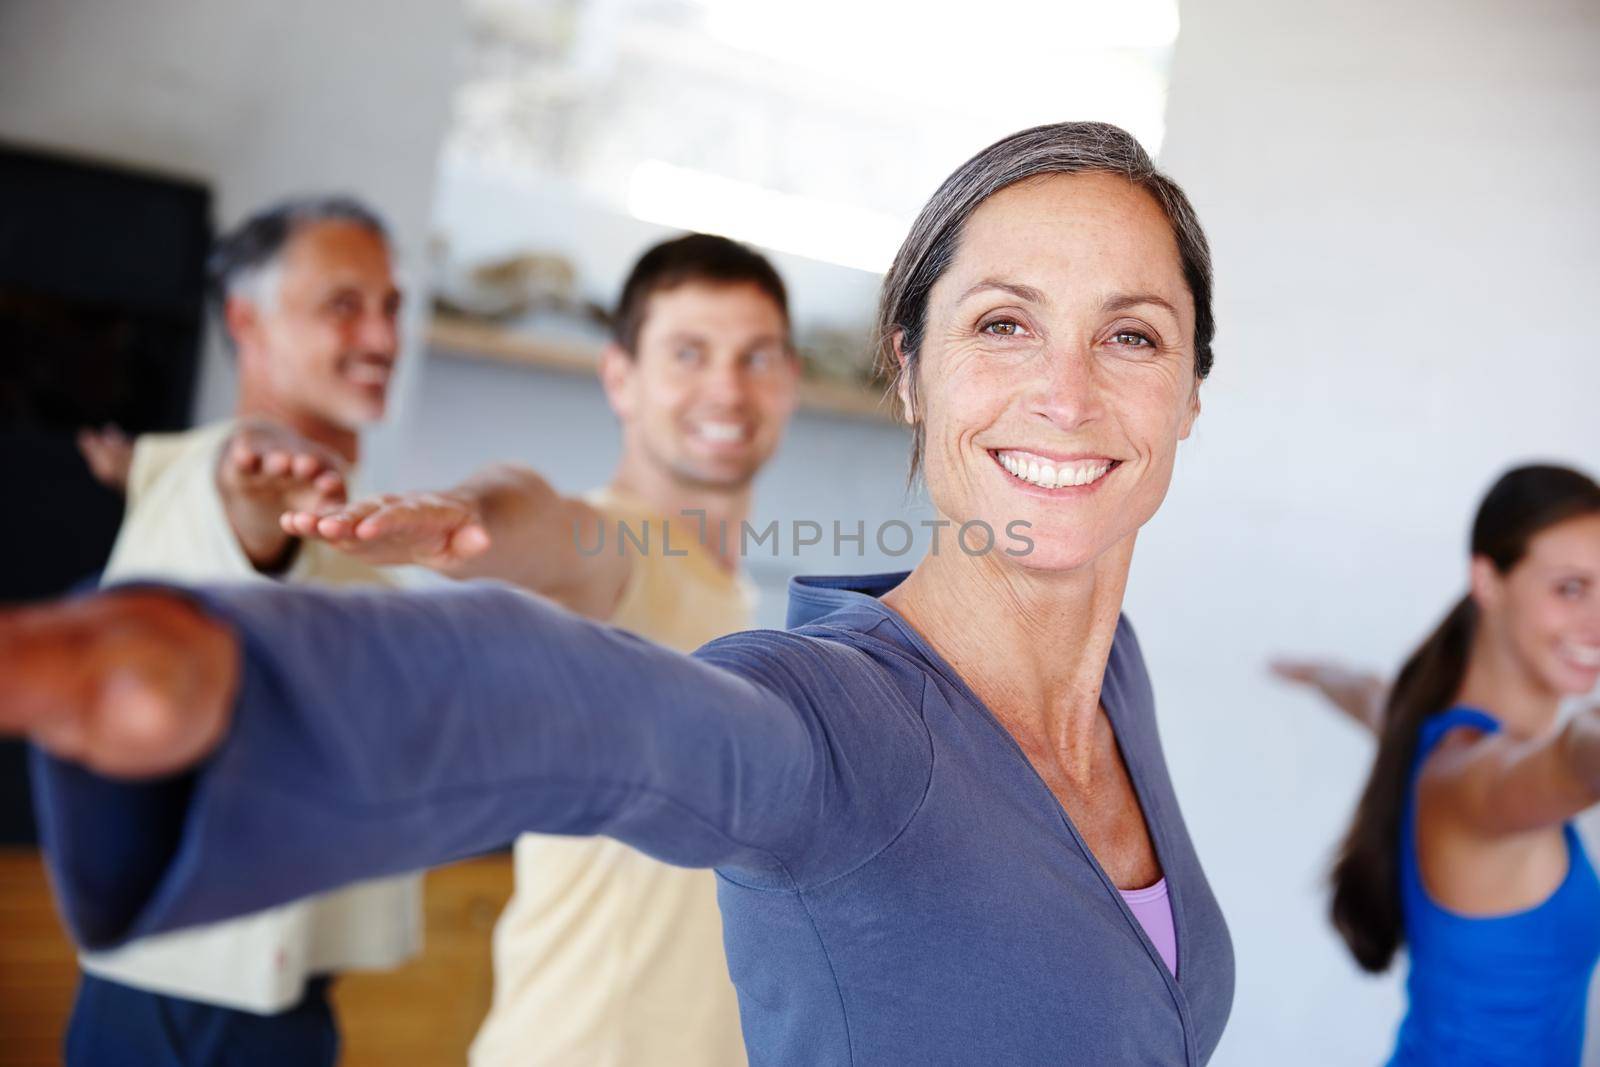 Health makes her happy. A group of people taking a class together at gym